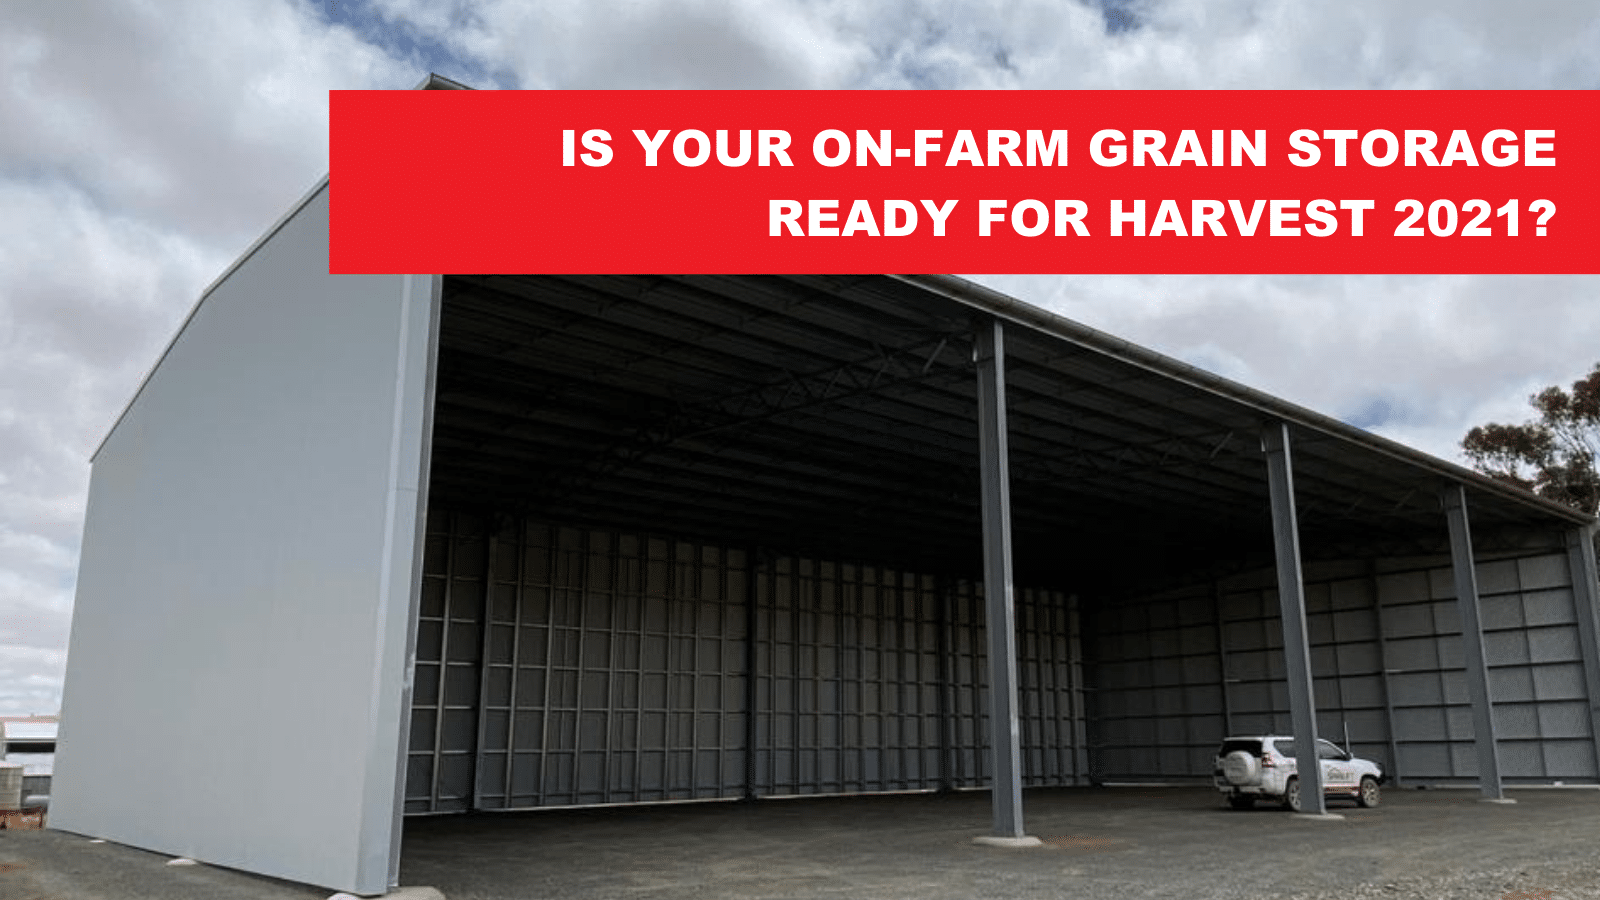 Is Your On-Farm Grain Storage Ready for Harvest 2021?